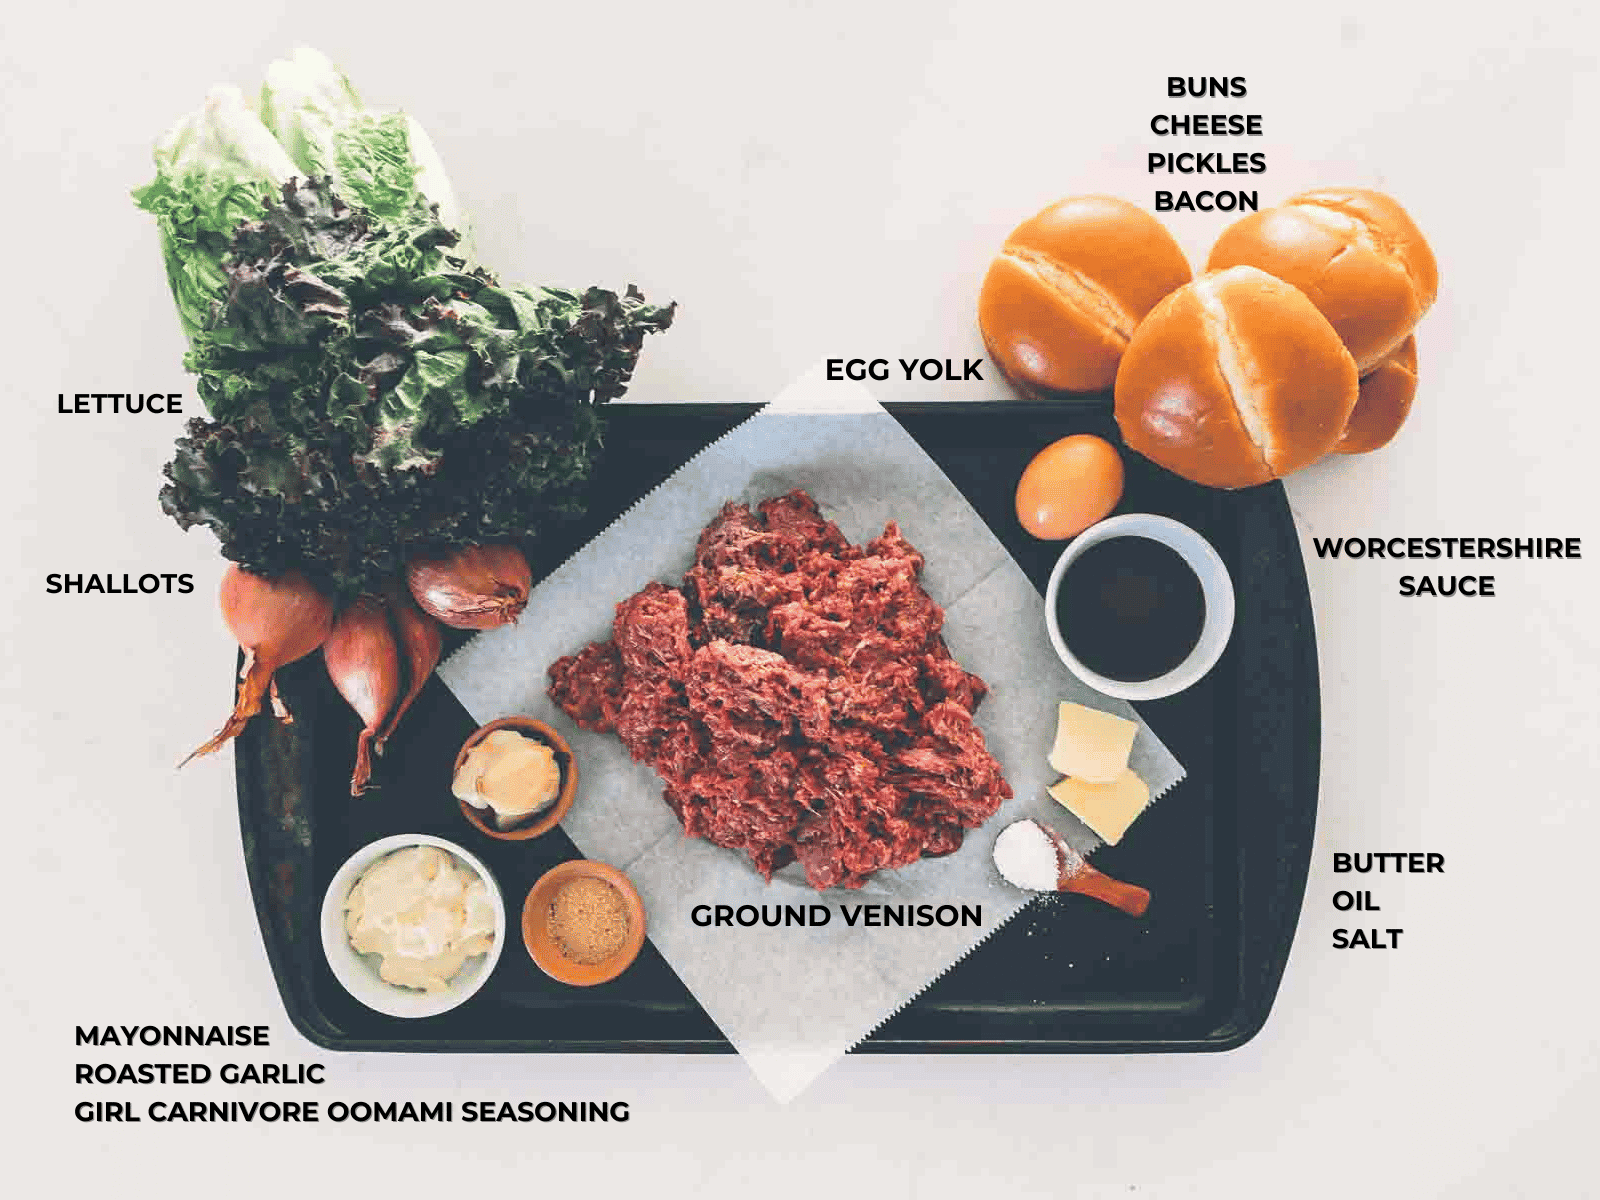 Ingredients for ground venison burgers. 